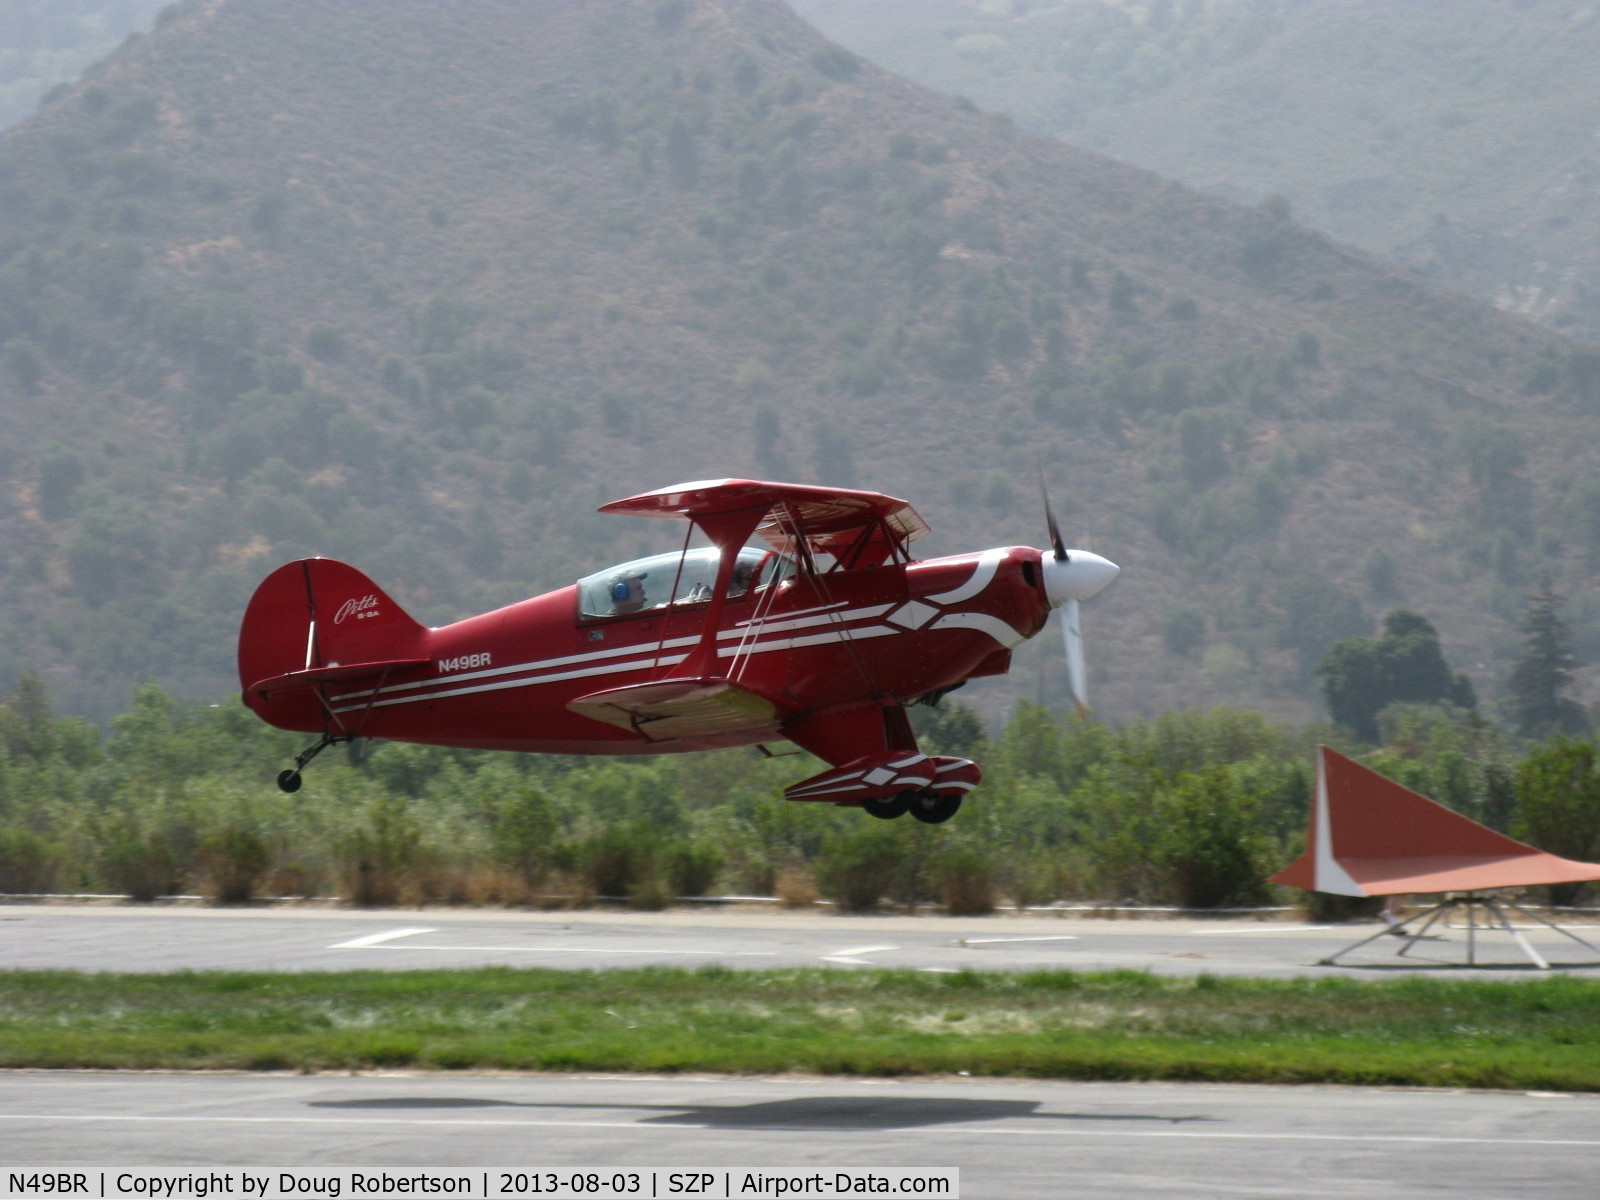 N49BR, Pitts S-2A Special C/N 2212, 1980 Aerotek Pitts S-2A, Lycoming AEIO-540 260 Hp, fast takeoff climb Rwy 22